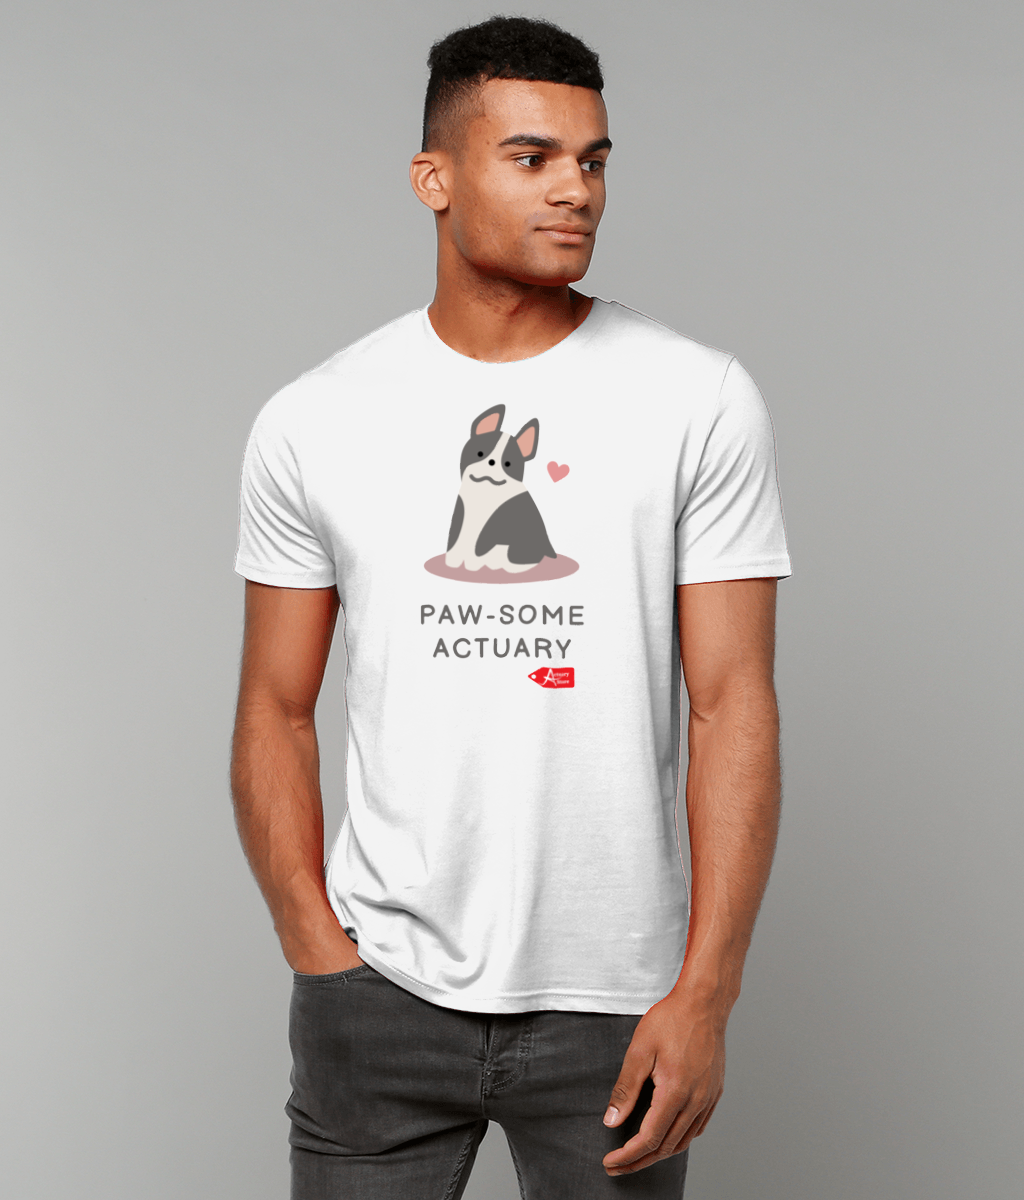 Paw-Some Actuary T-Shirt